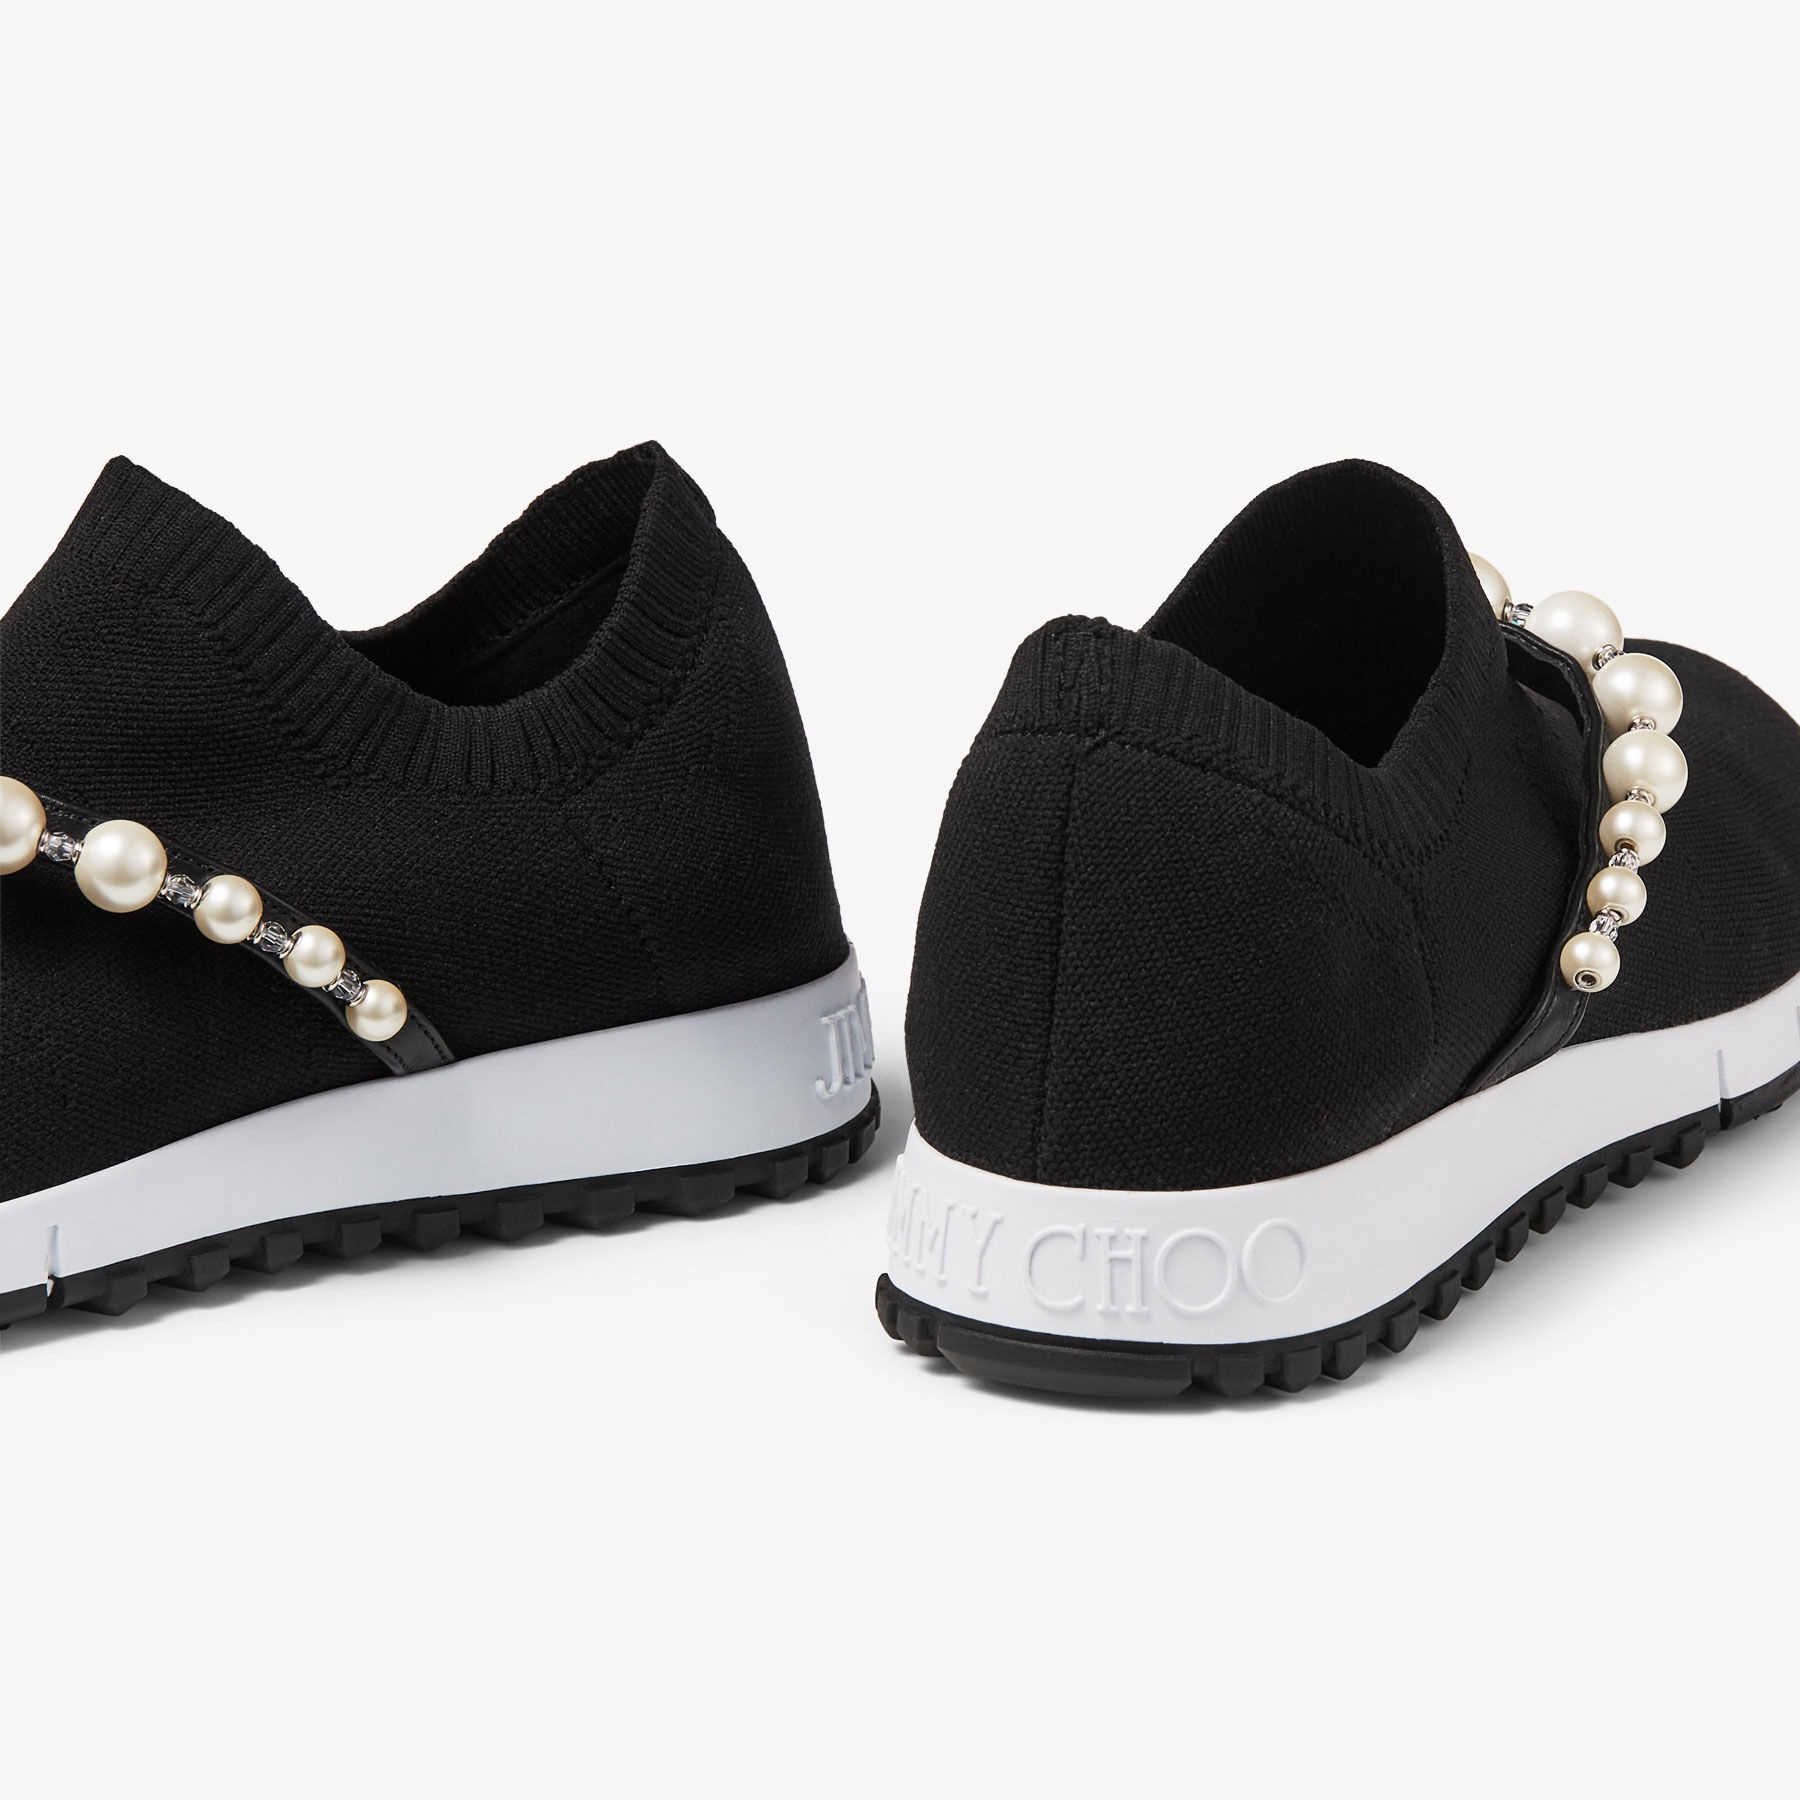 Venice
Black Knit Trainers with Pearls - 4